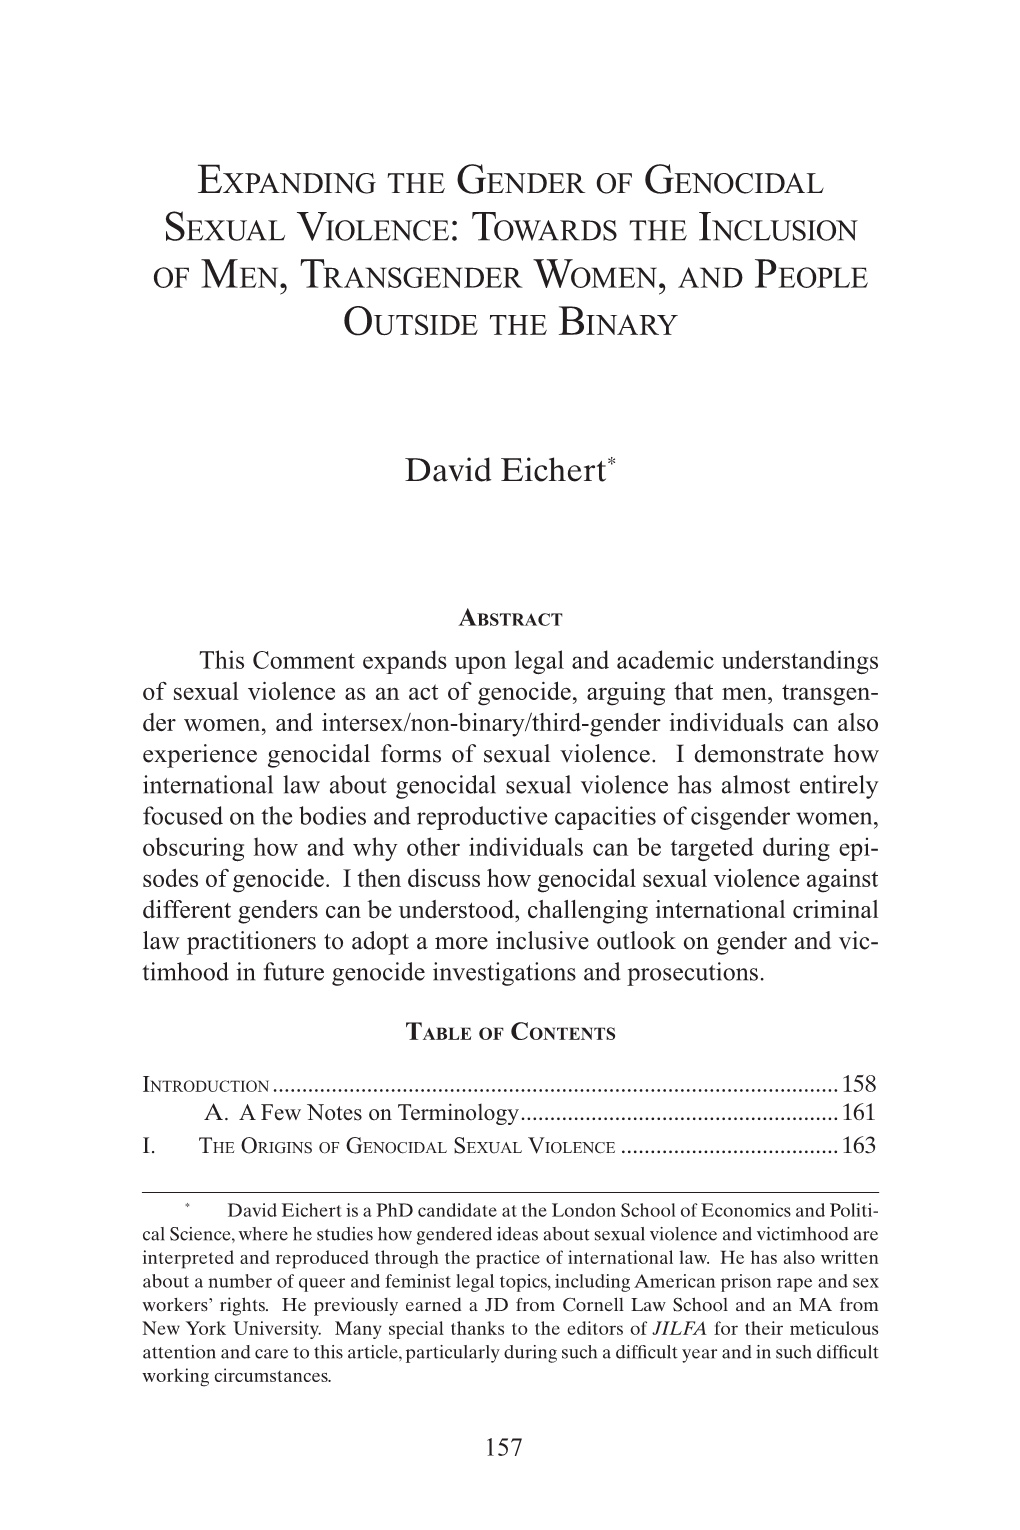 Expanding the Gender of Genocidal Sexual Violence: Towards the Inclusion of Men, Transgender Women, and People Outside the Binary